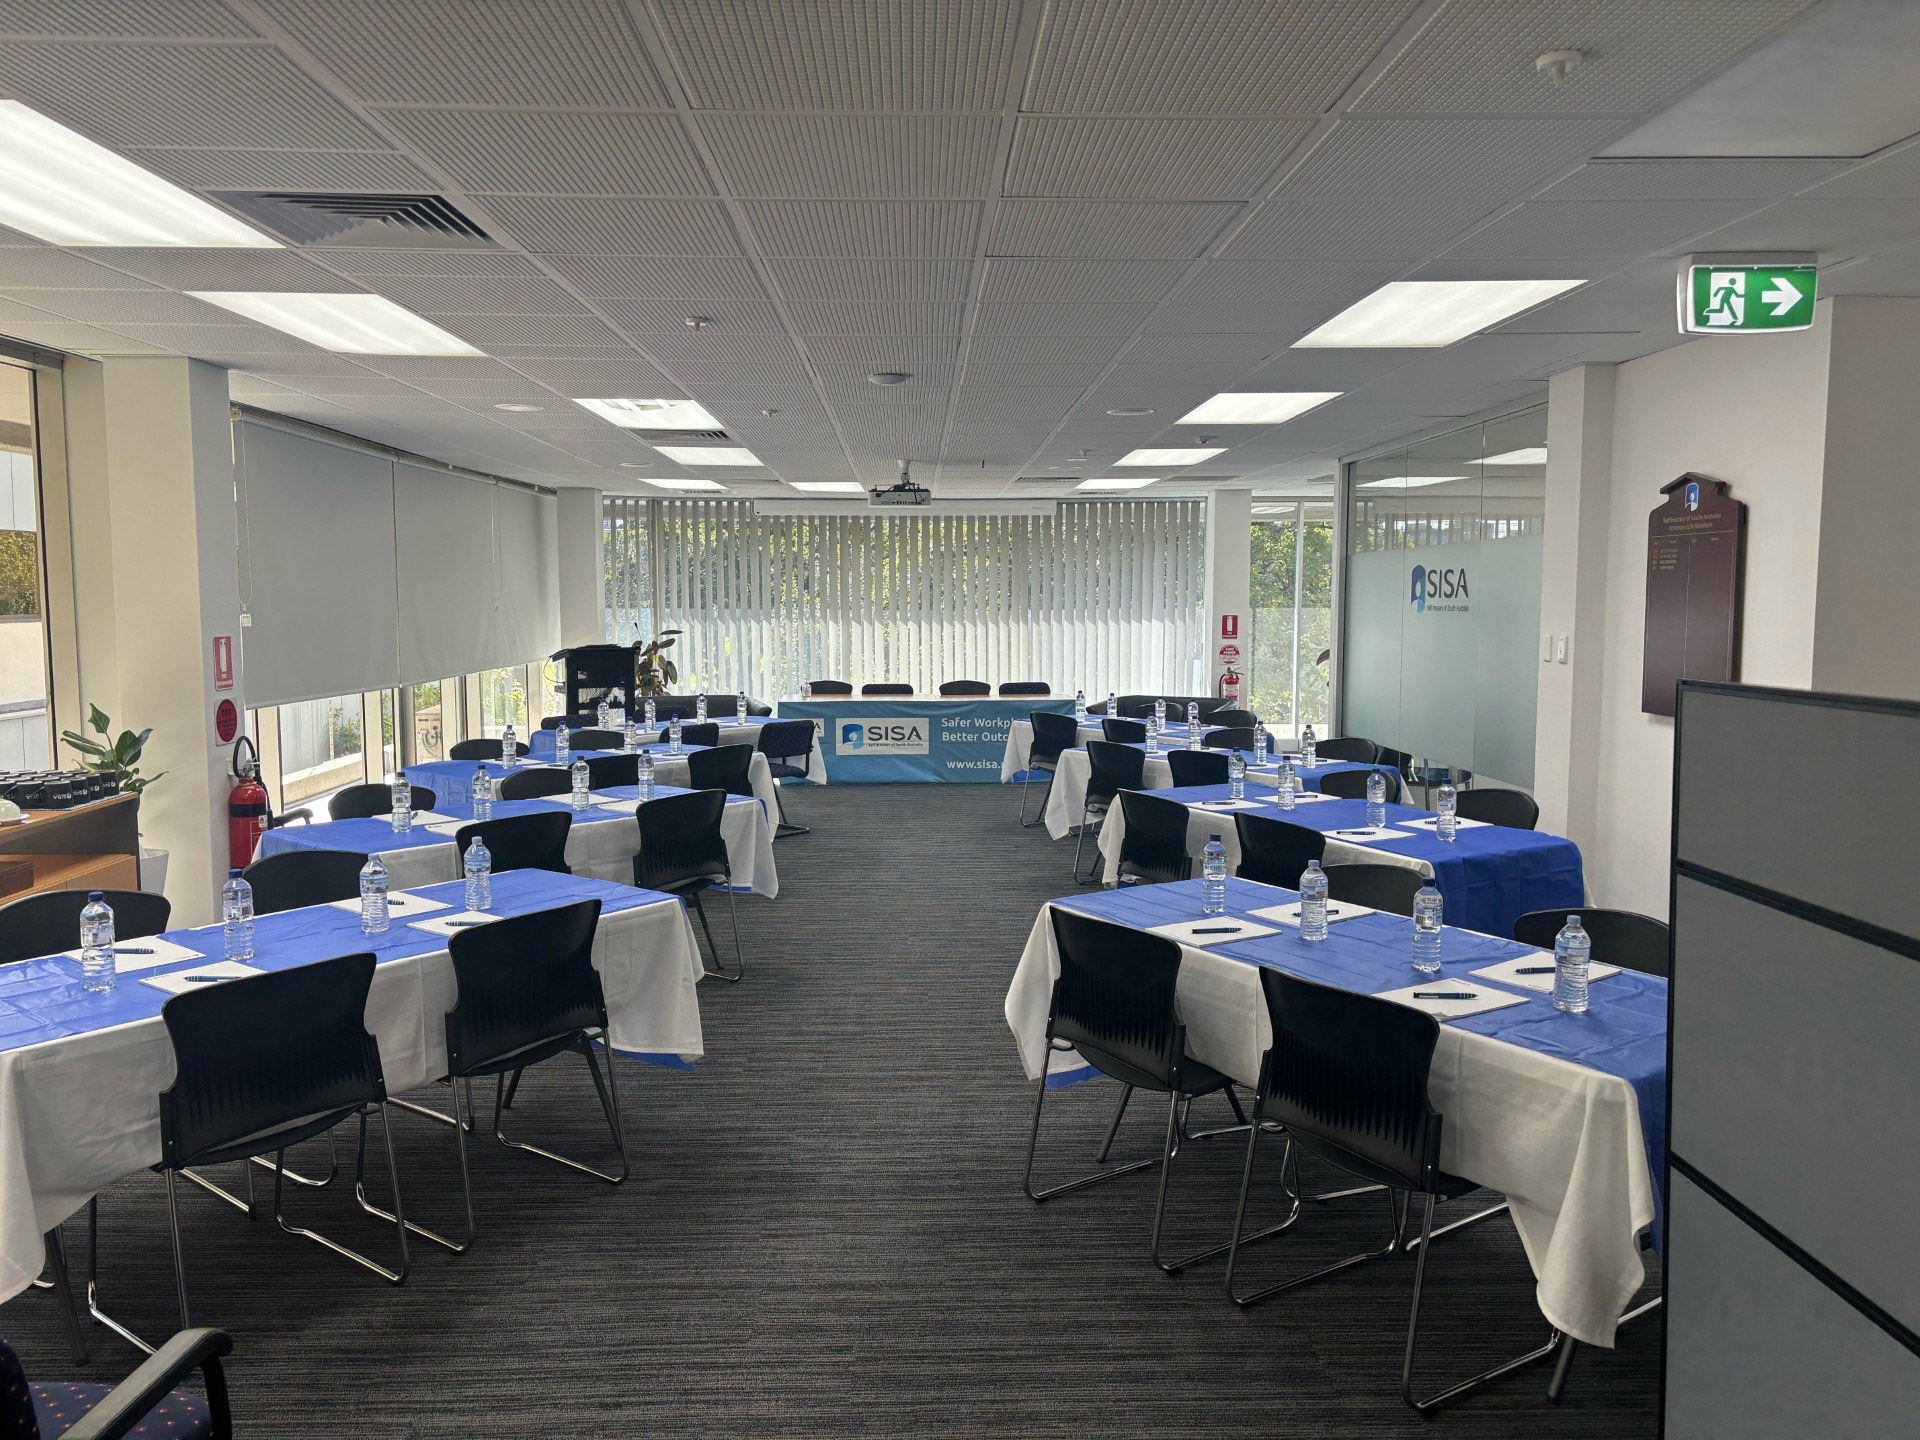 SISA Conference Room - Seats 40 to 60 People - available for public booking